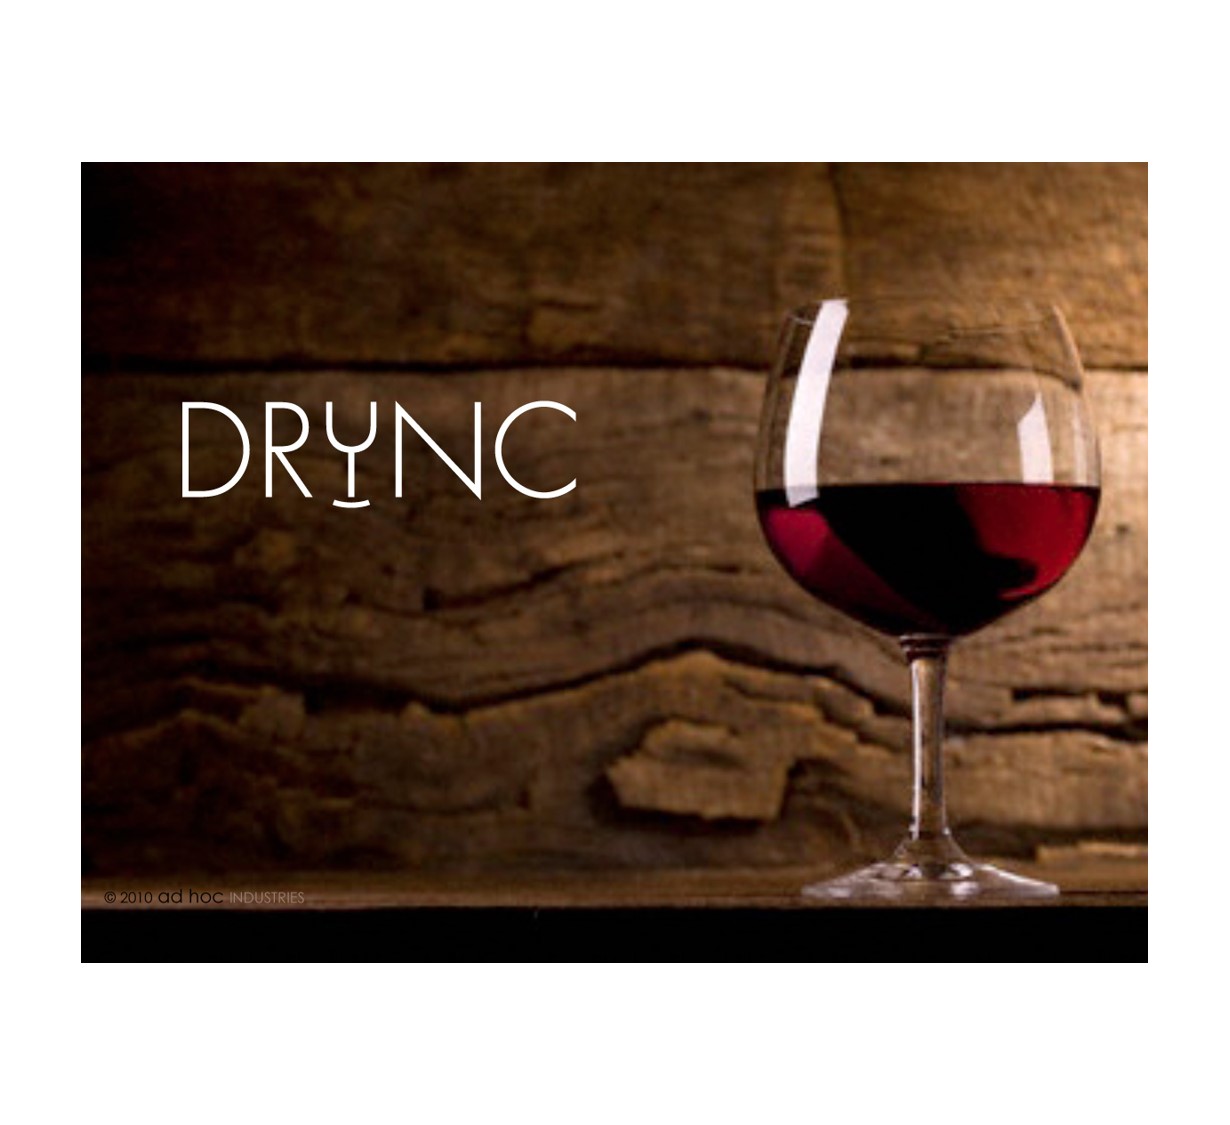 Drync – Get Your Very Own Wine Connoisseur